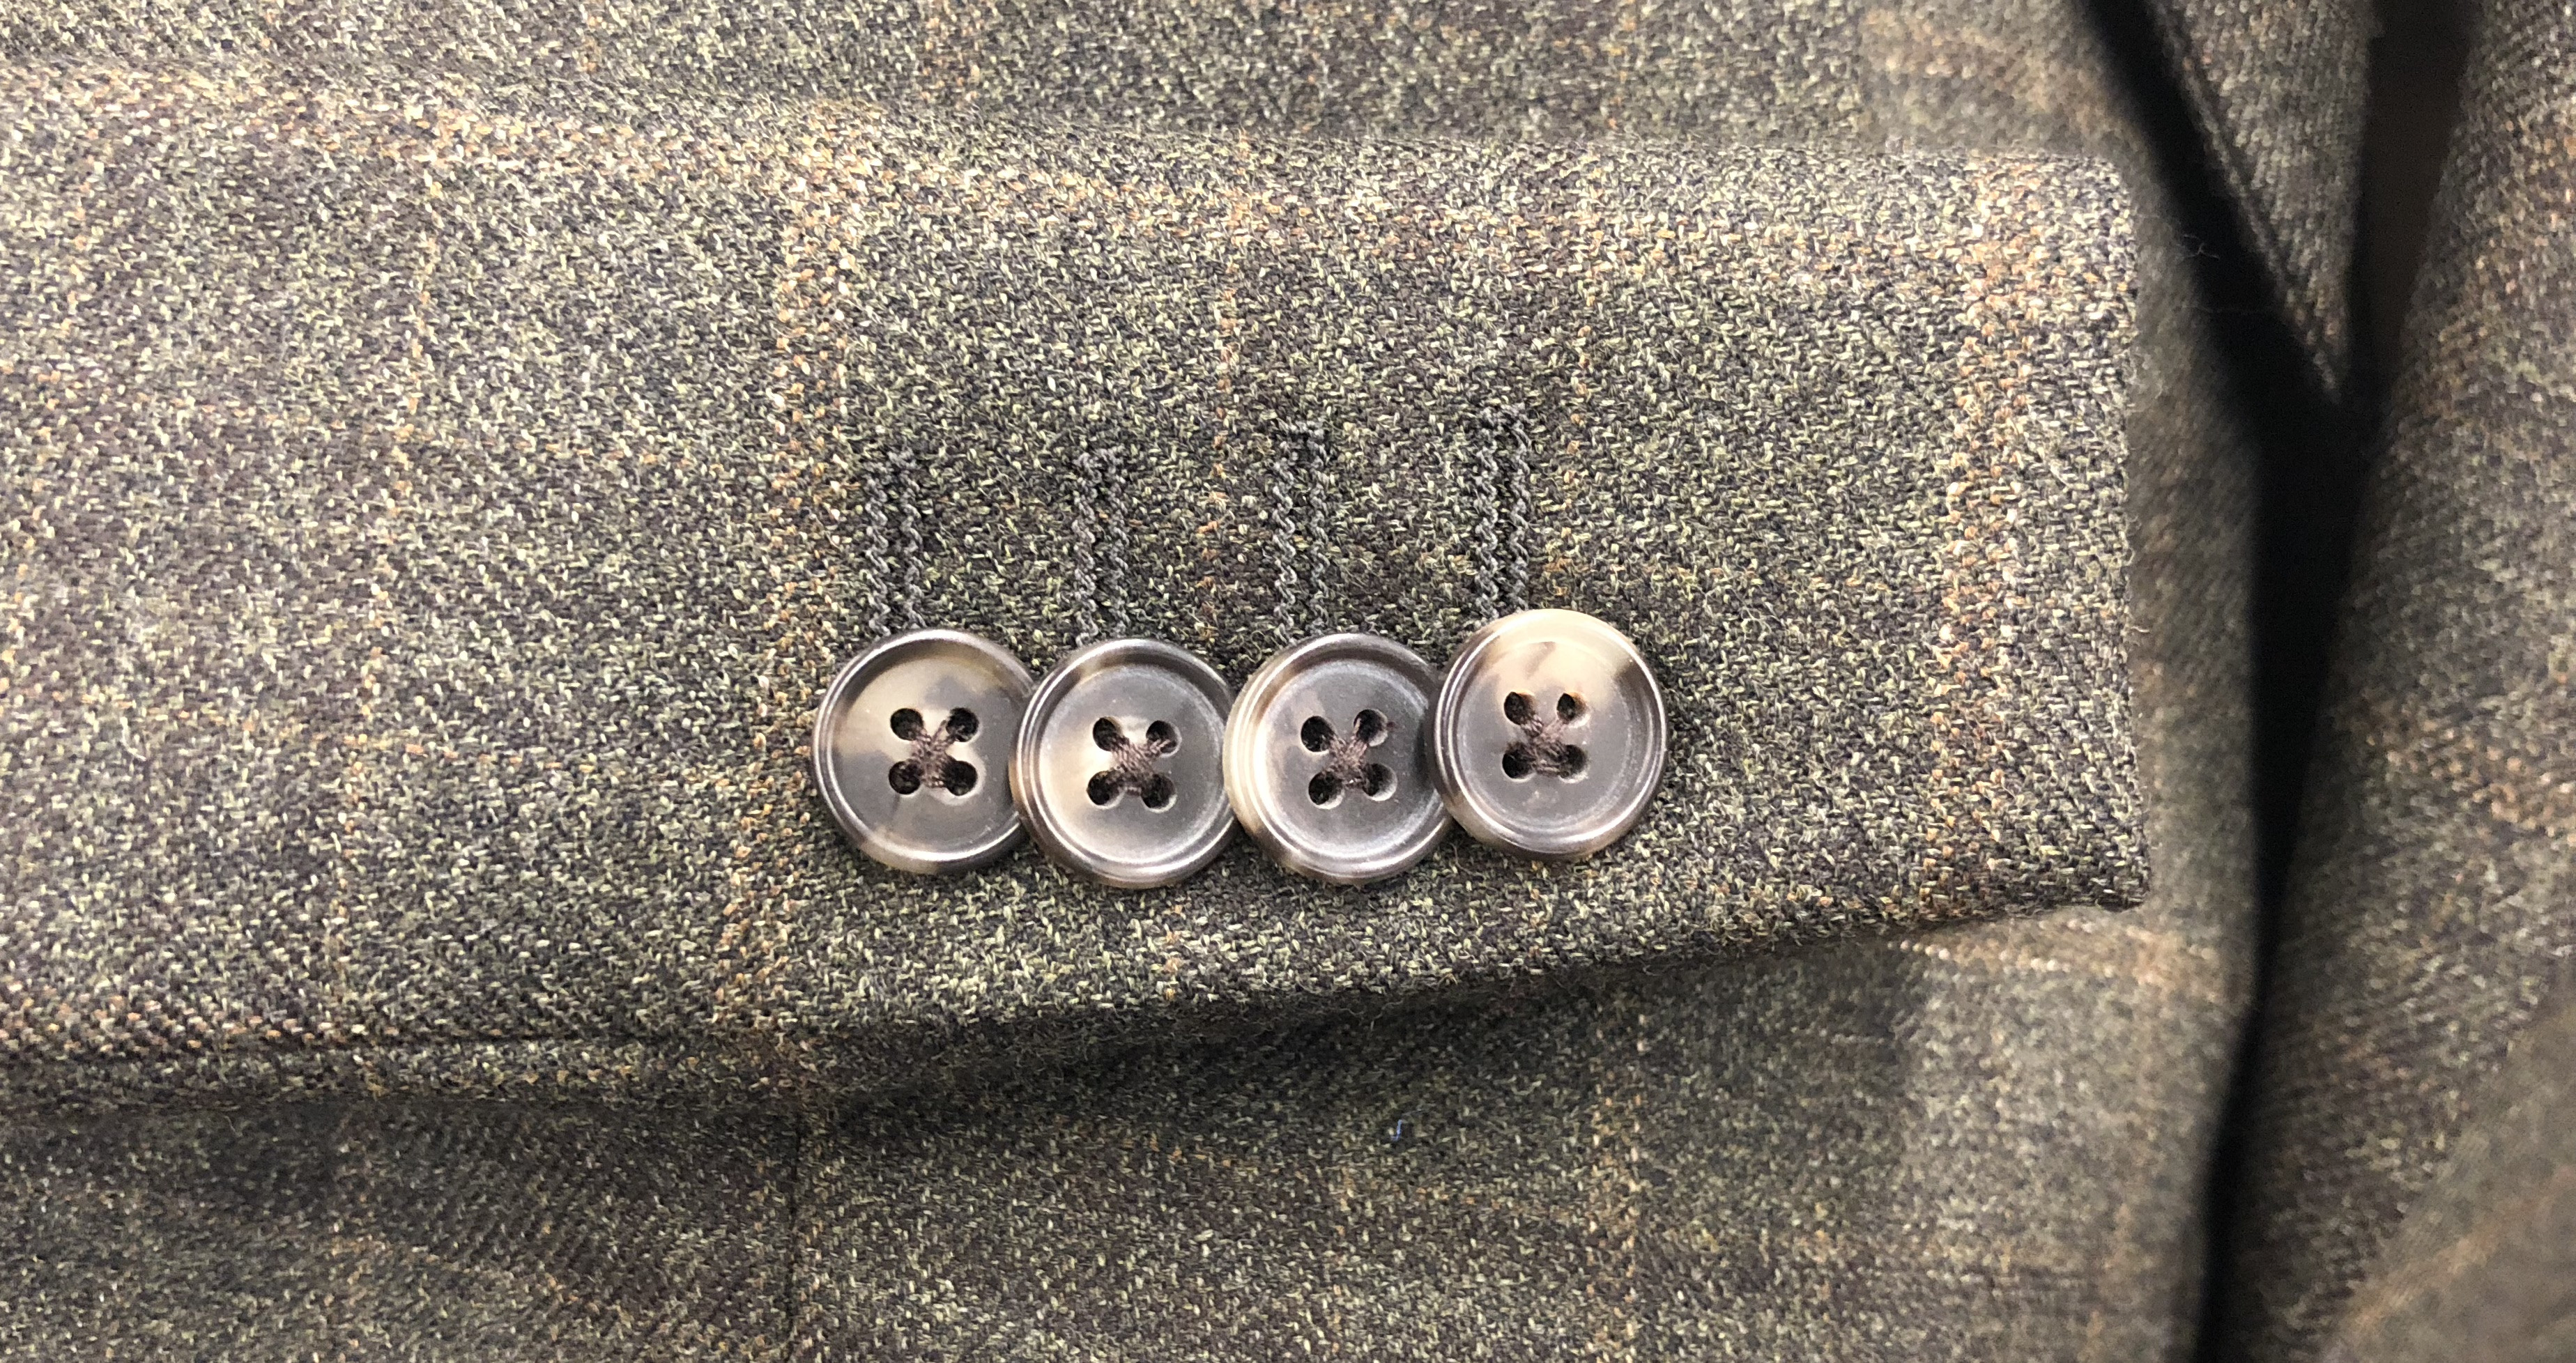 www.theGenuineGentleman.com Suit Quality Hallmarks - Suit waterfall overlapped buttons